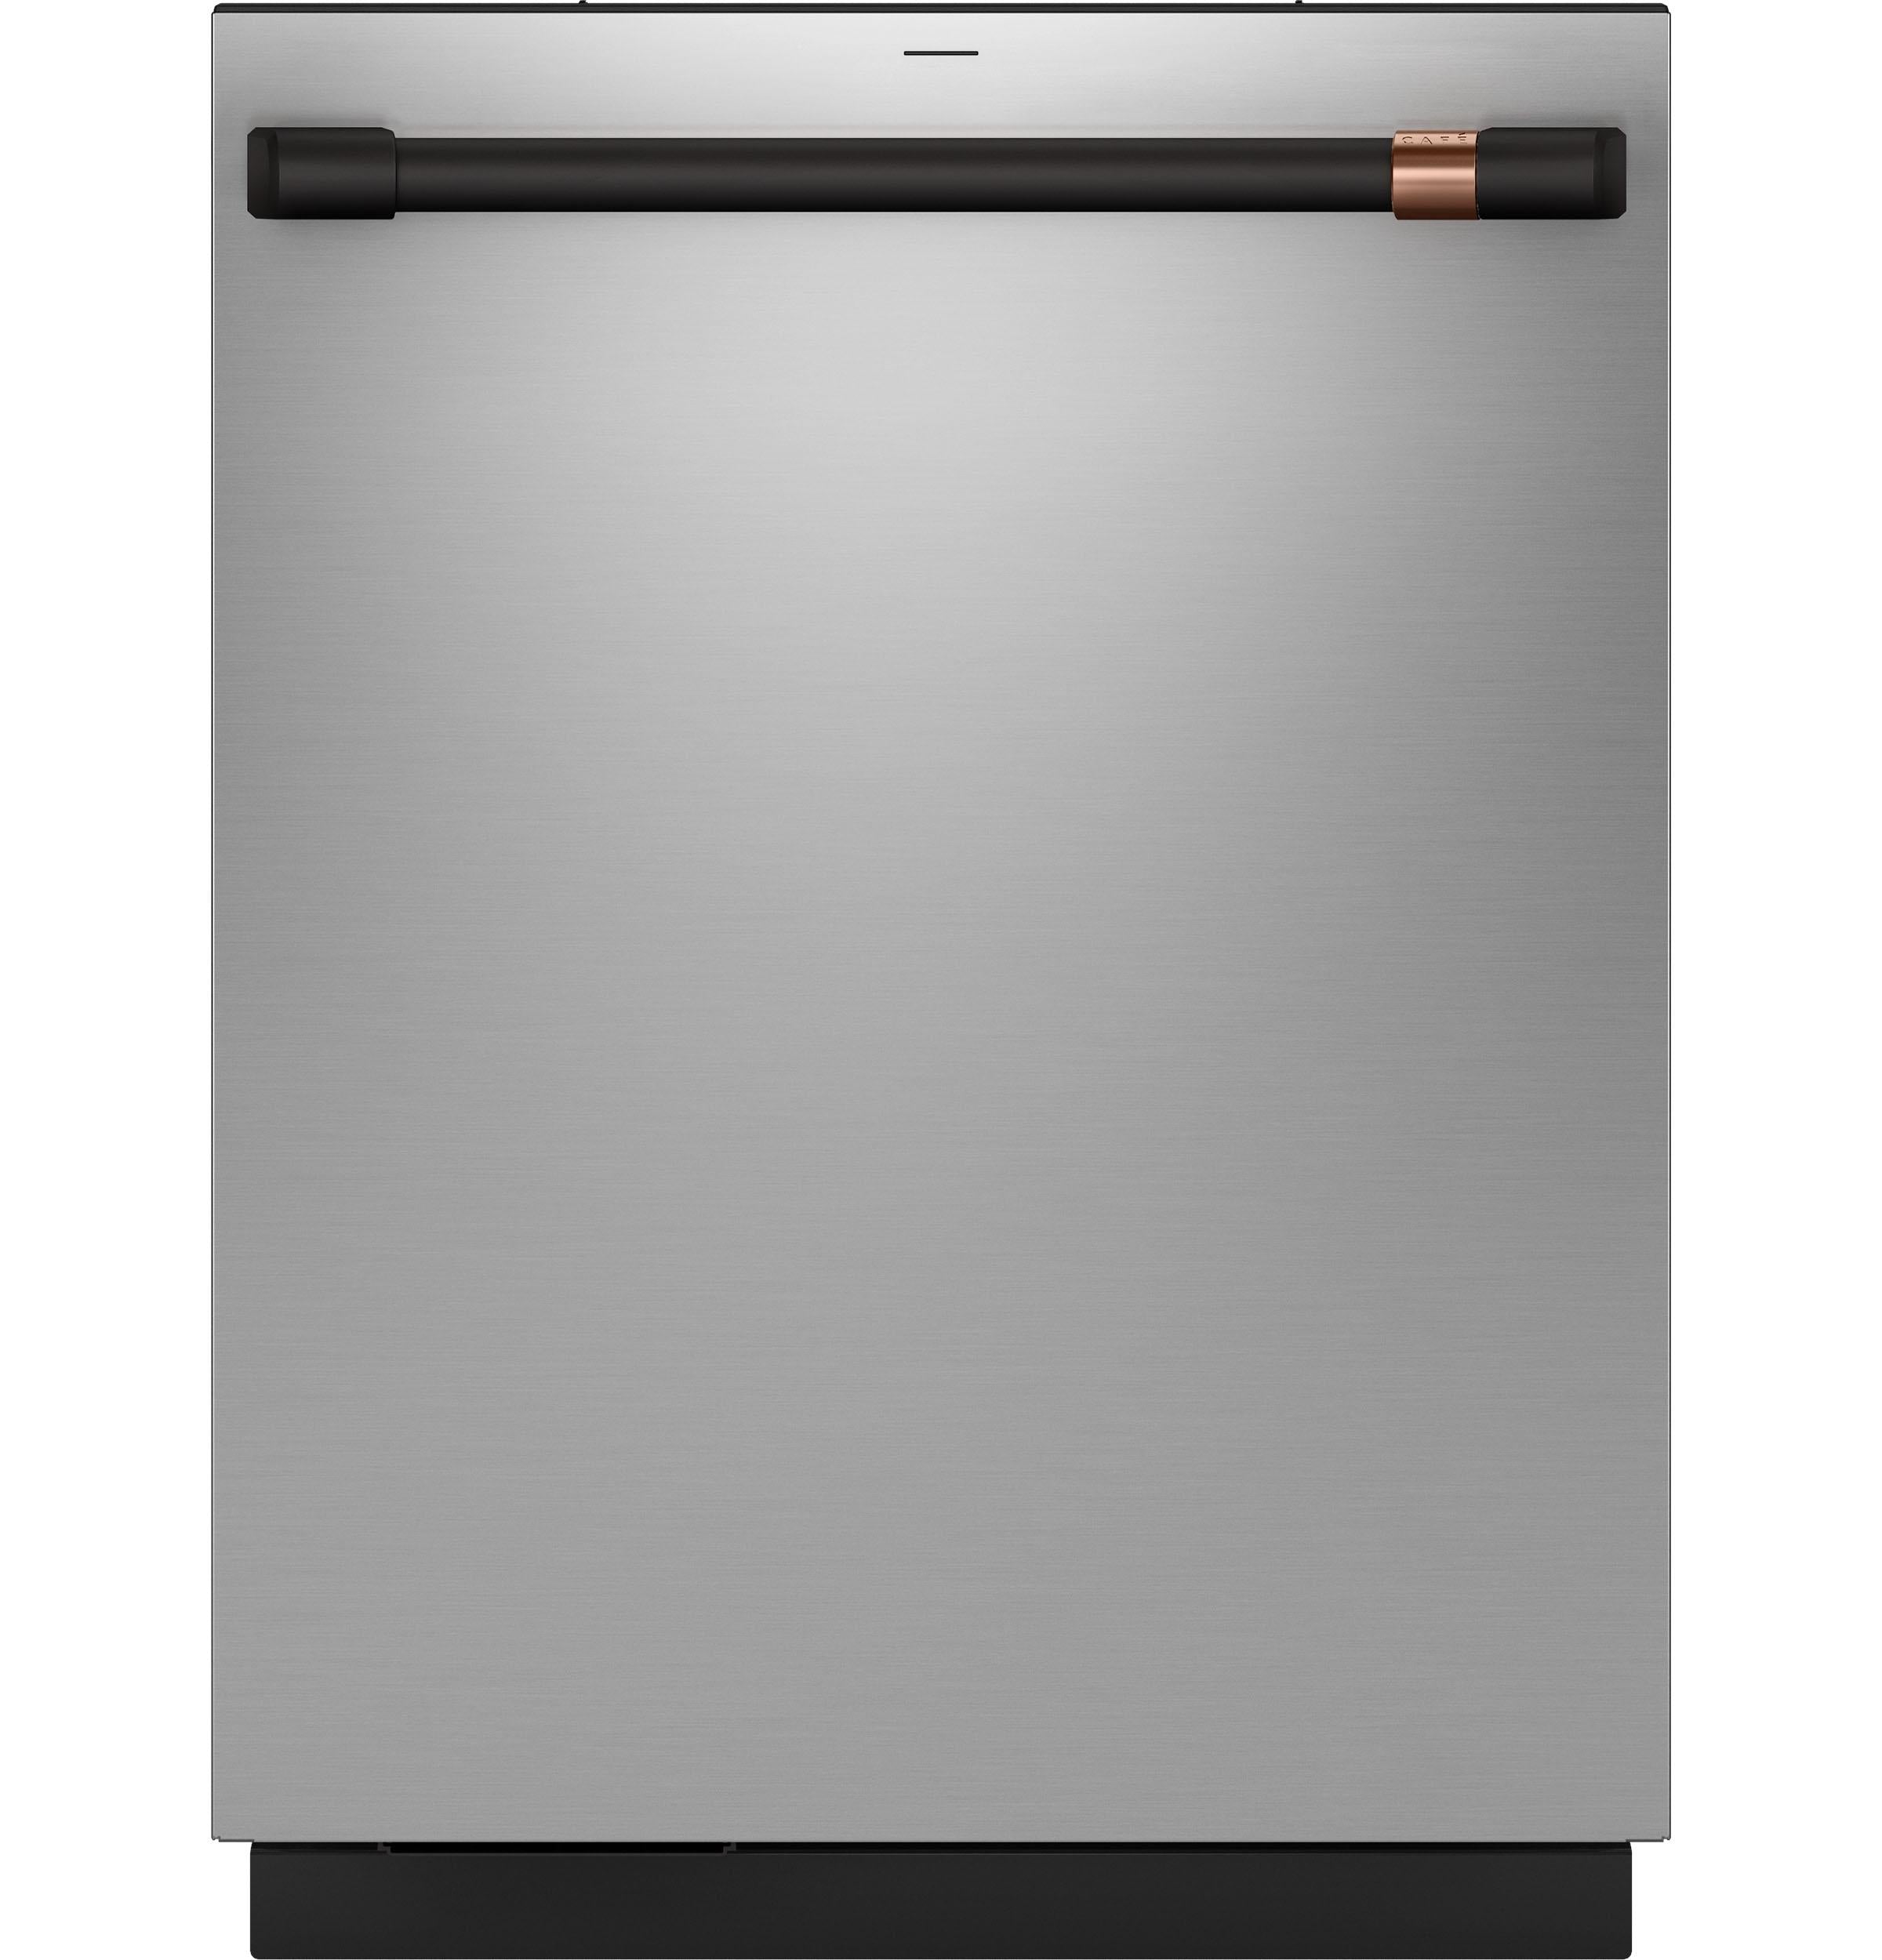 Cafe Caf(eback)™ CustomFit ENERGY STAR Stainless Interior Smart Dishwasher with Ultra Wash Top Rack and Dual Convection Ultra Dry, LED Lights, 39 dBA